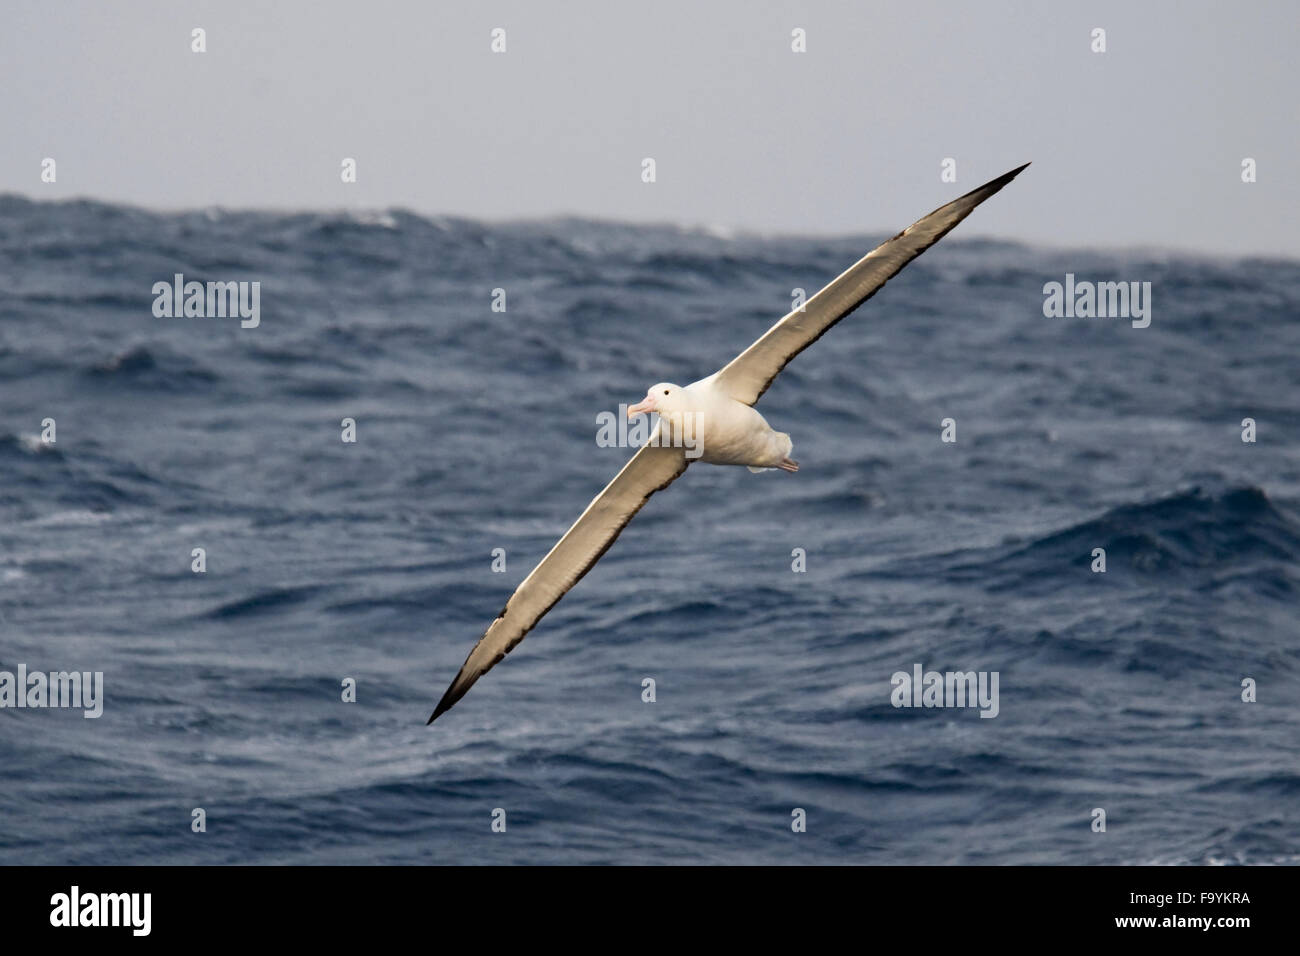 southern royal albatross (Diomedea epomophora), gliding with large wingspan, Drake Passage, Southern Ocean Stock Photo